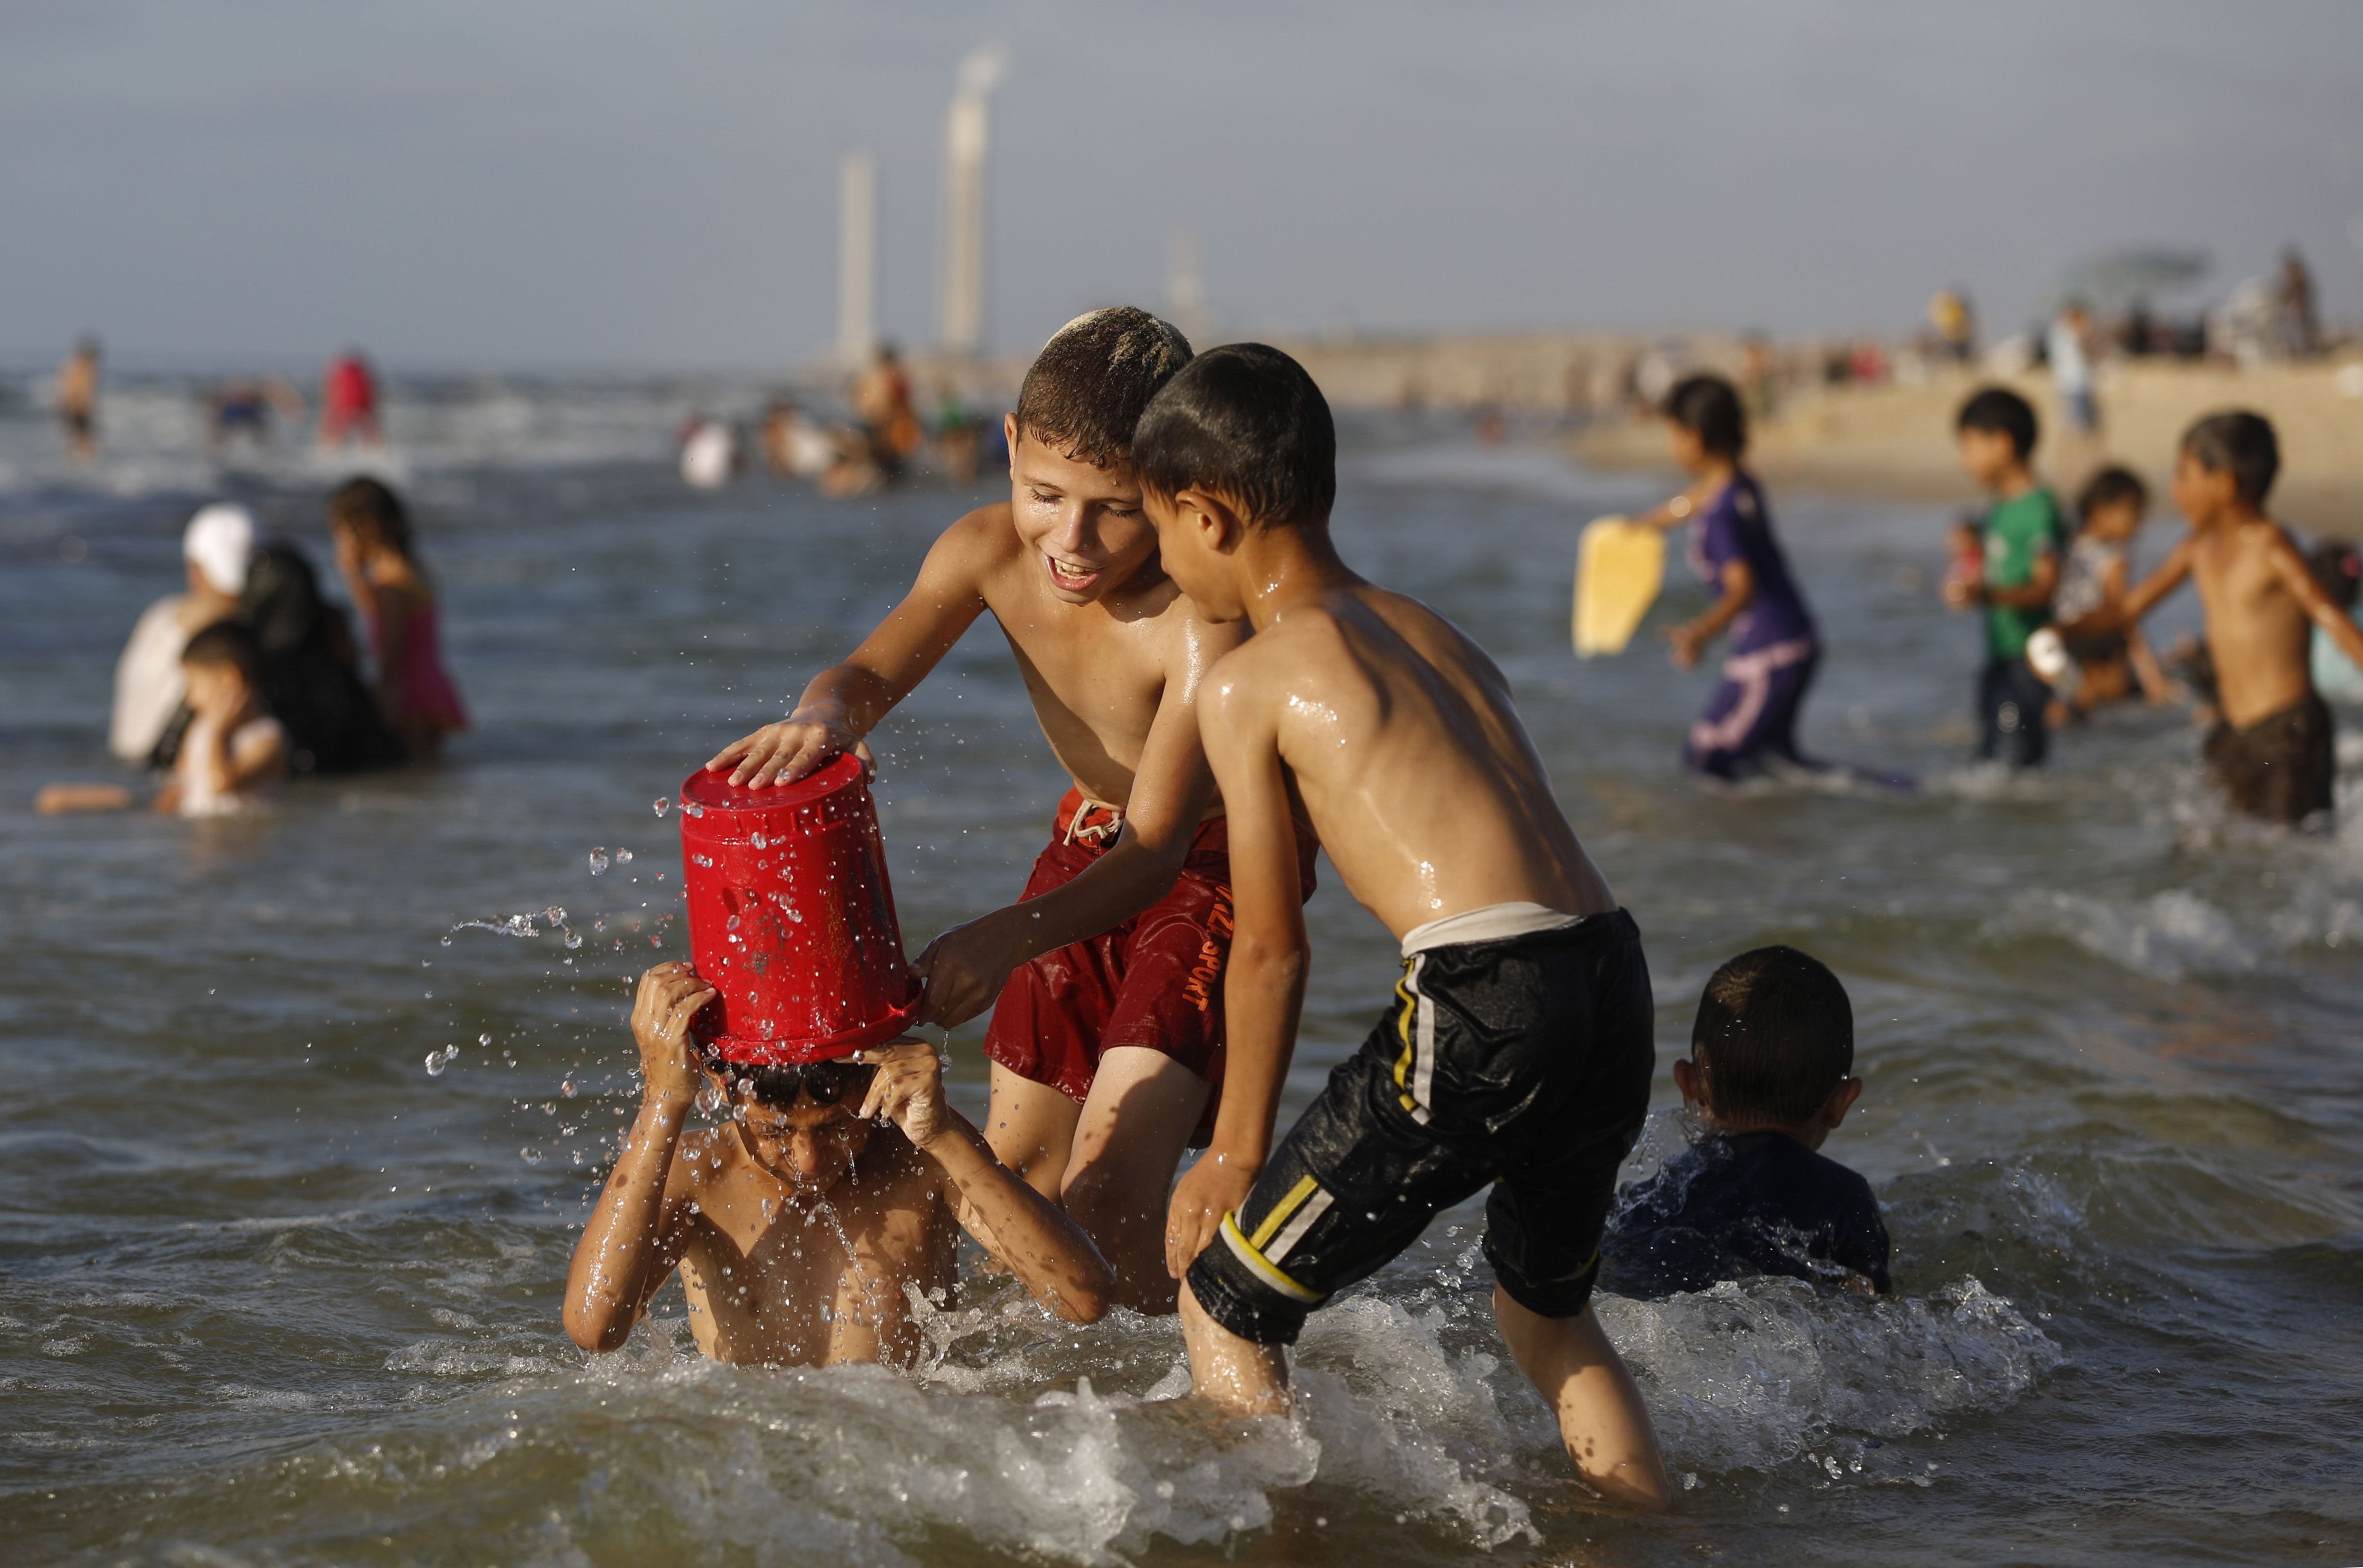 Palestinian children dump water on a boy as they swim on a beach, close to the divide with Israel, near Gaza City on Sept. 12, 2014. (Mohammed Abed—AFP/Getty Images)